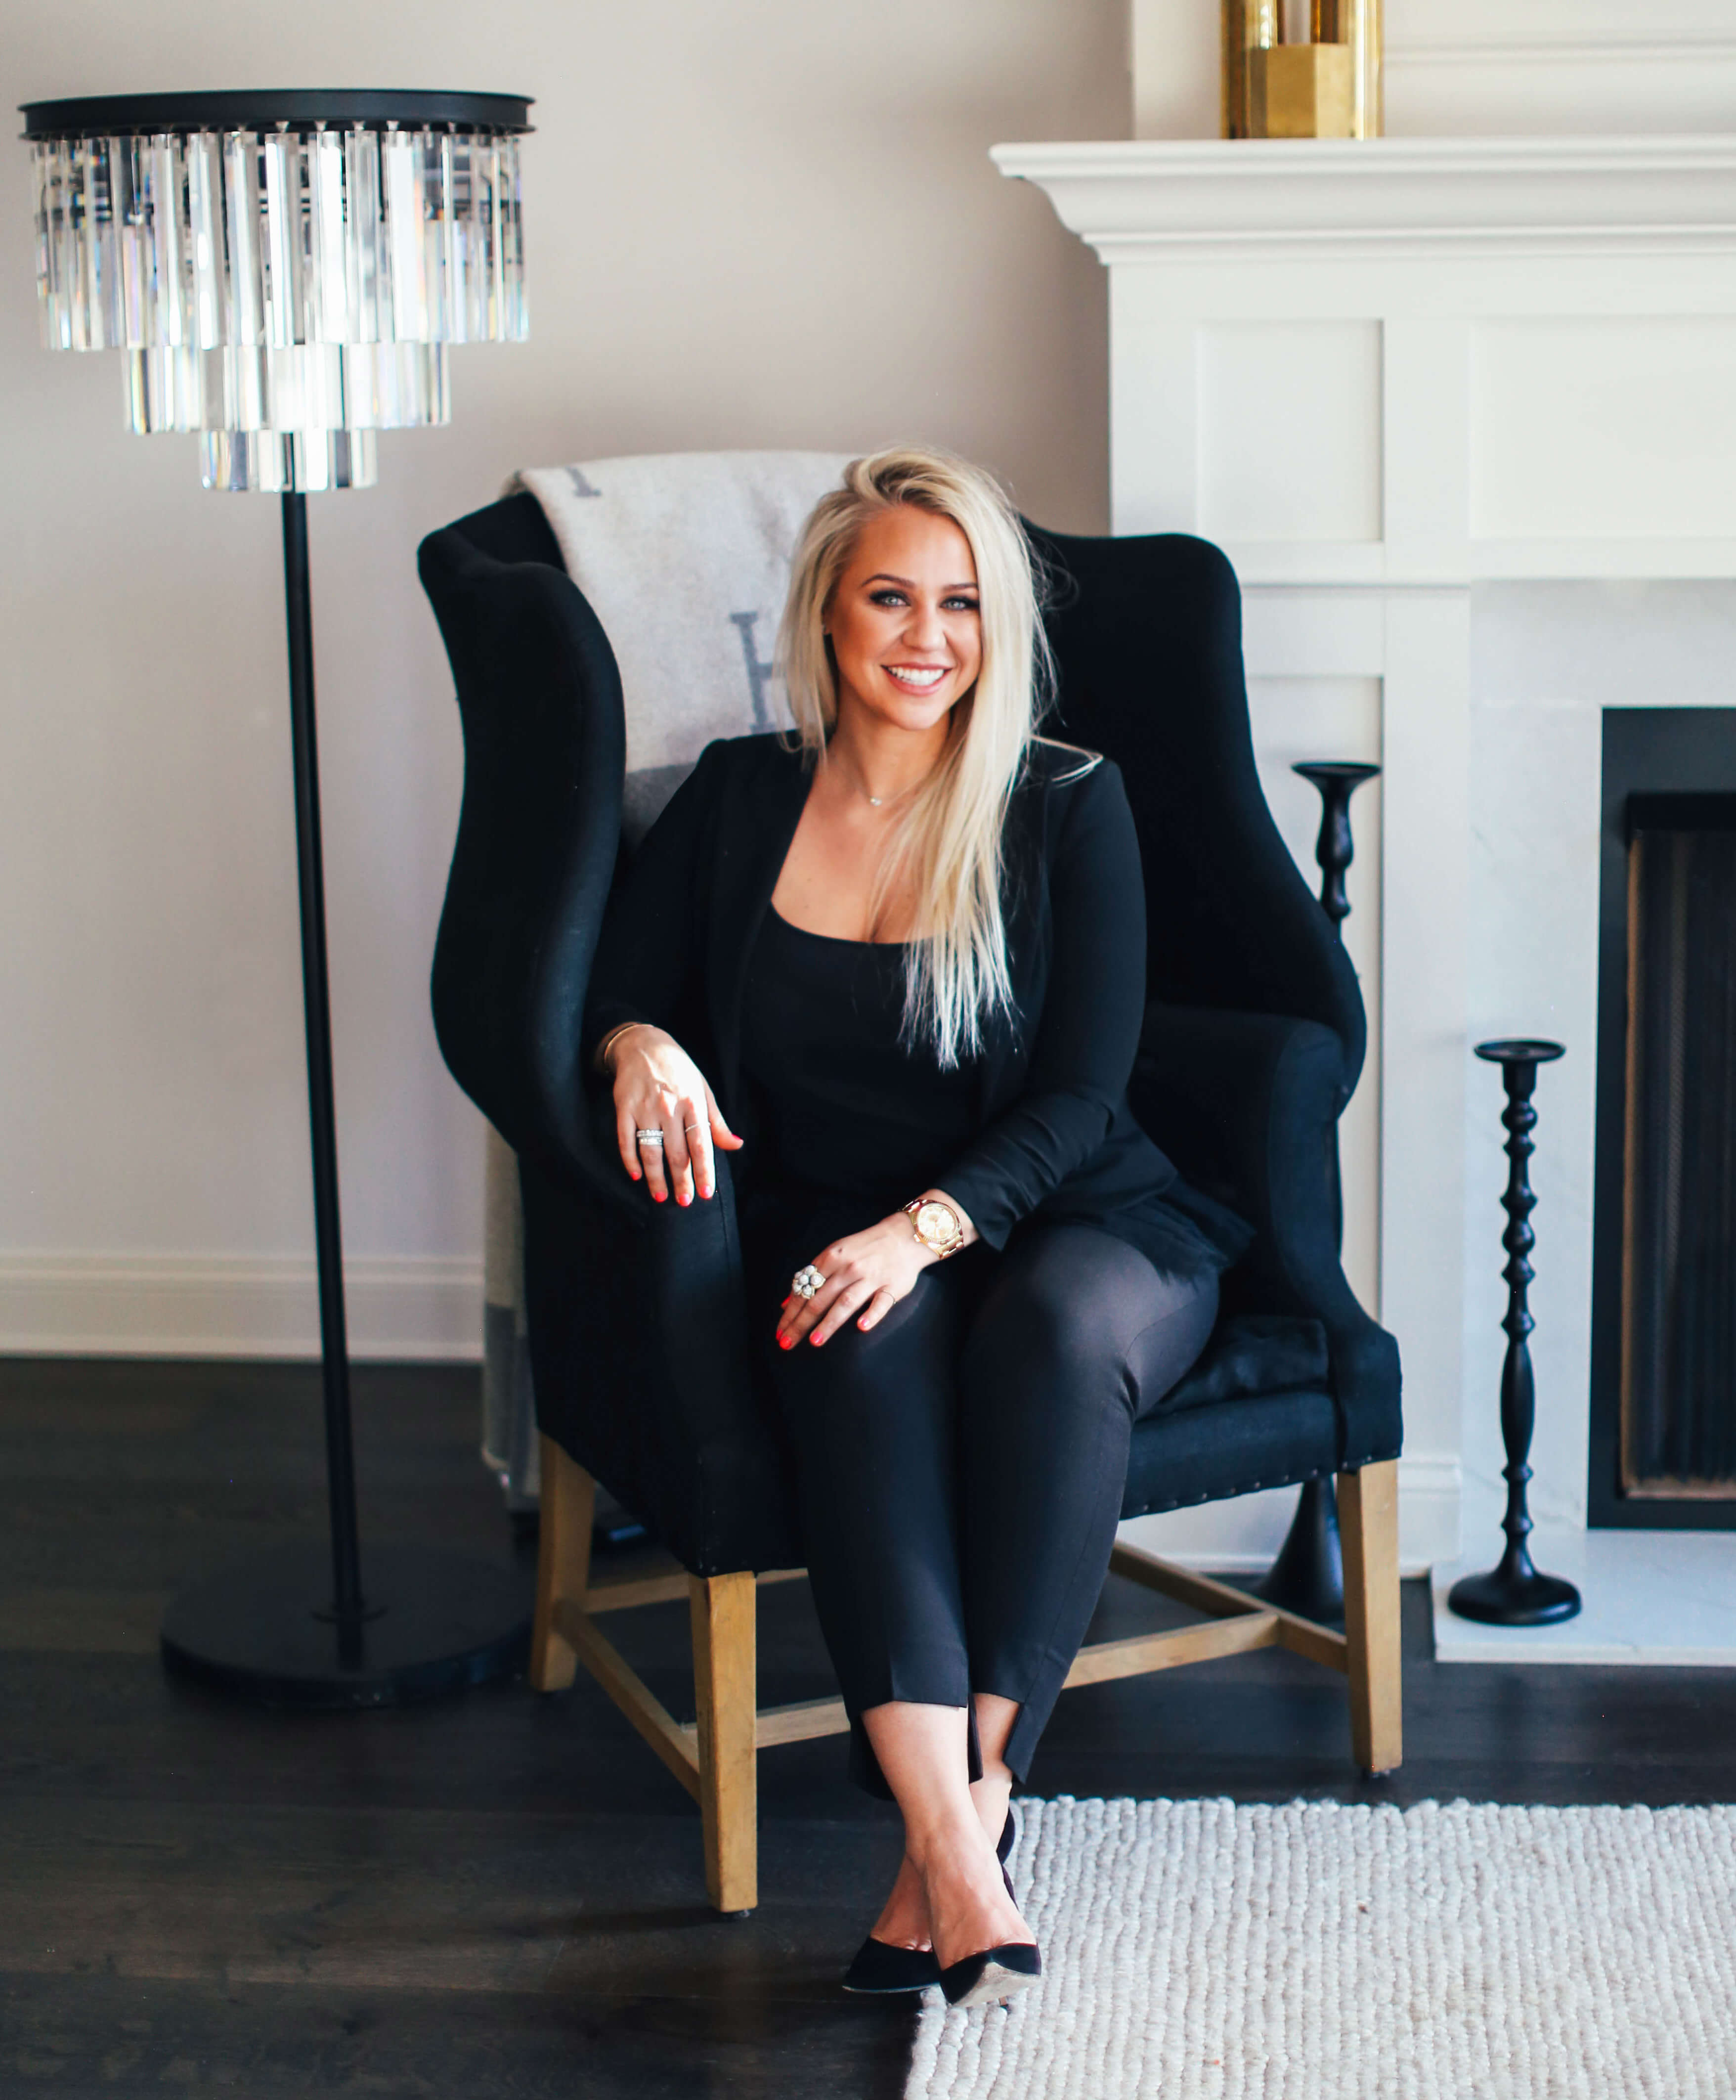 Meet our Luxury Concierge - Lindsay Smith